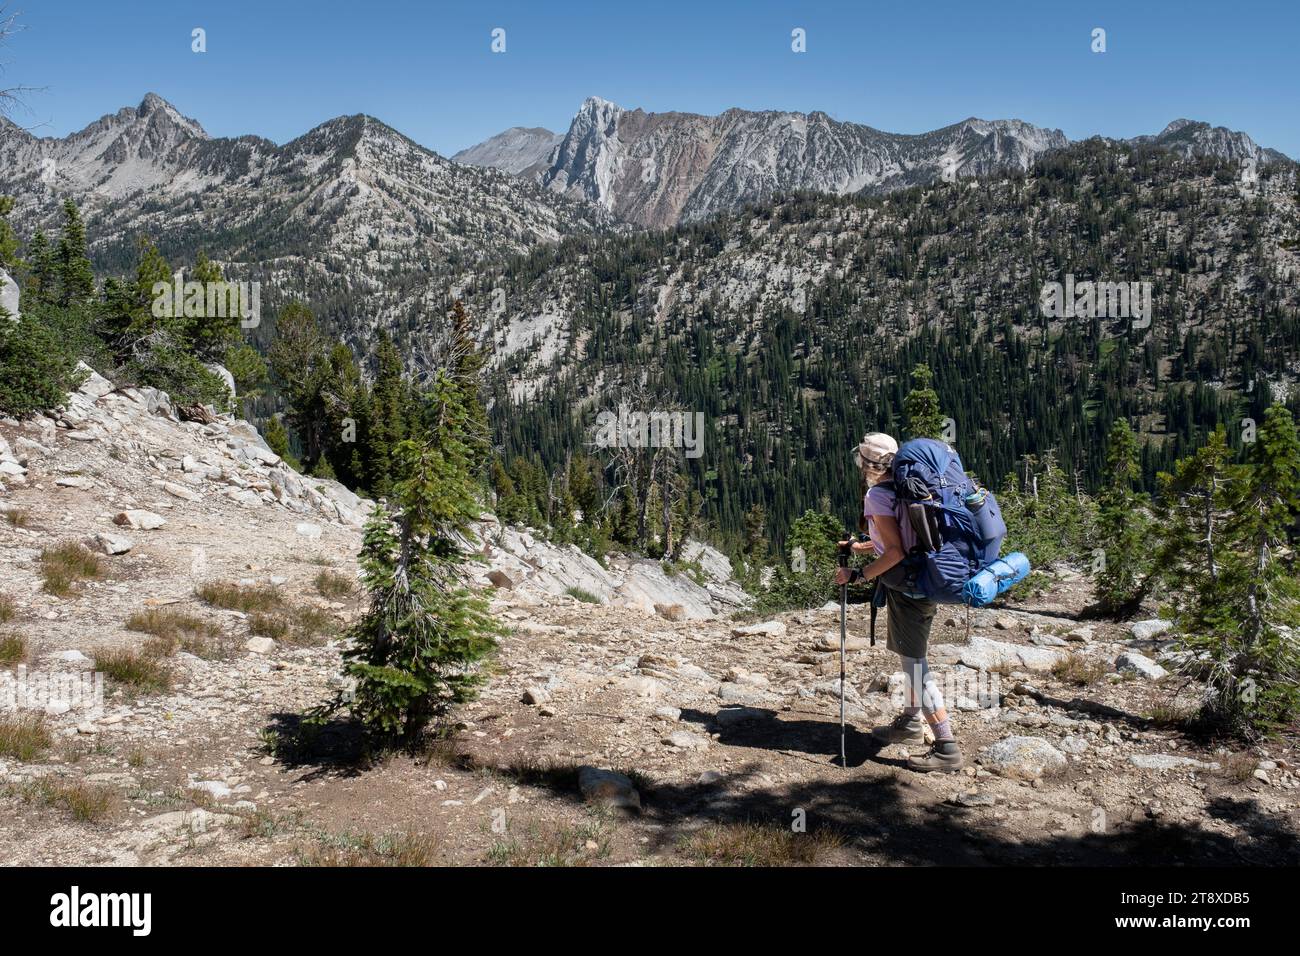 OR02668-00....OREGON - Woman backpacking on the Hurricane Trail stops to look at Matterhorn peak , Eagle Cap Wilderness, Wallowa-Whitman National Fore Stock Photo